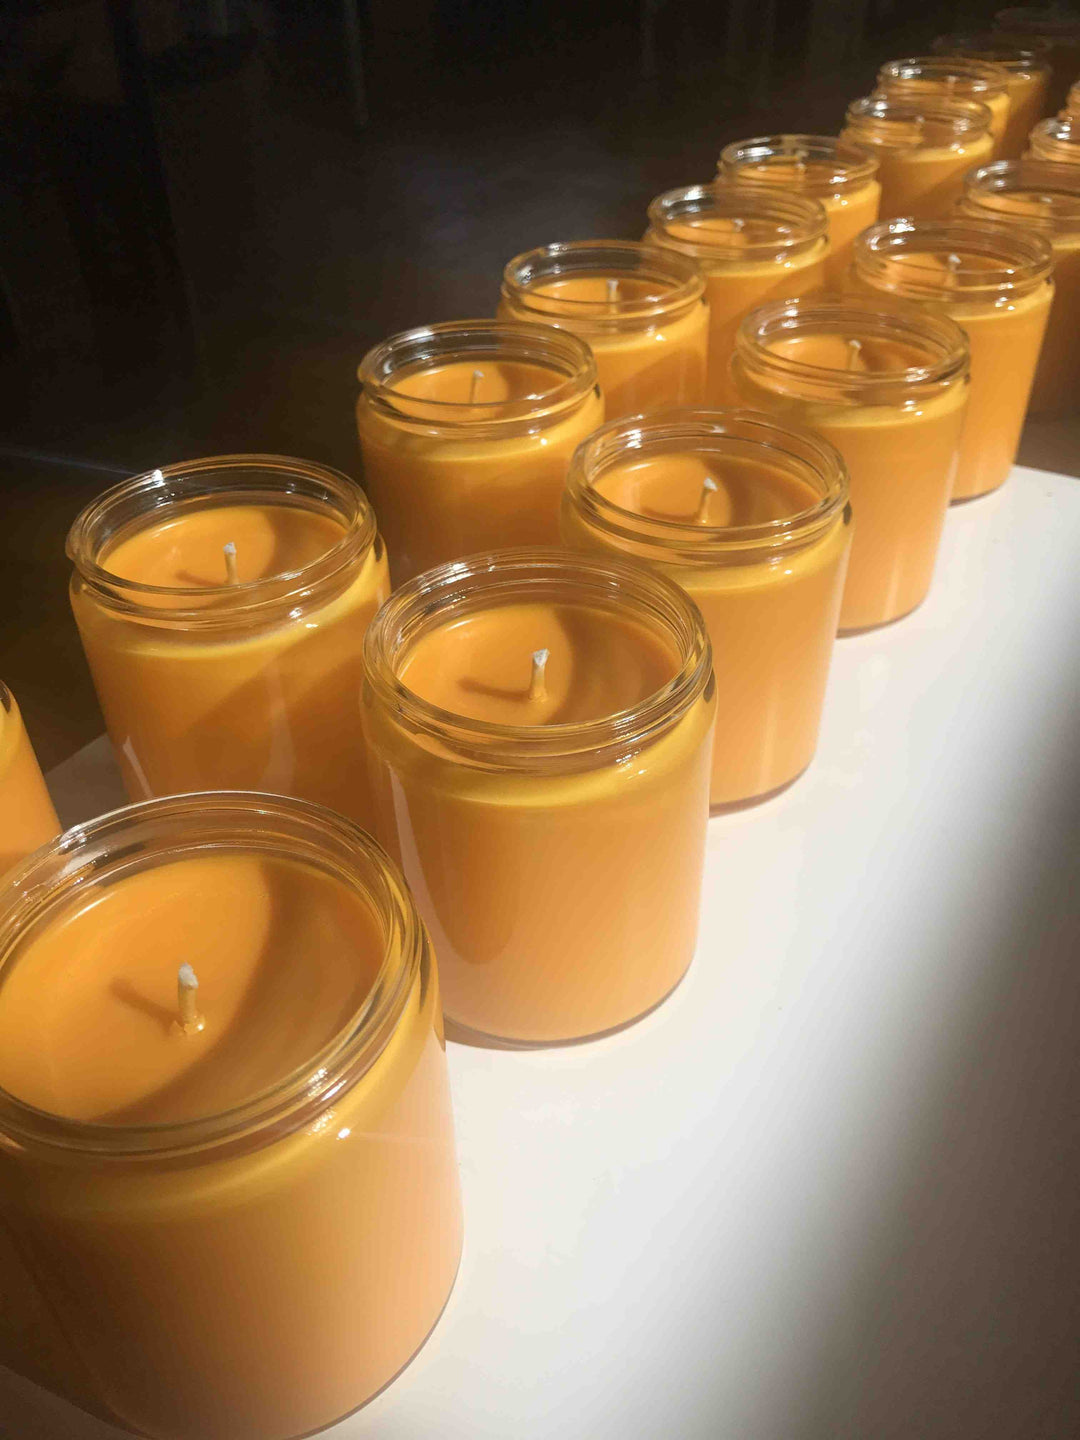 Wax Candles 101: What You Need to Know Before Purchasing